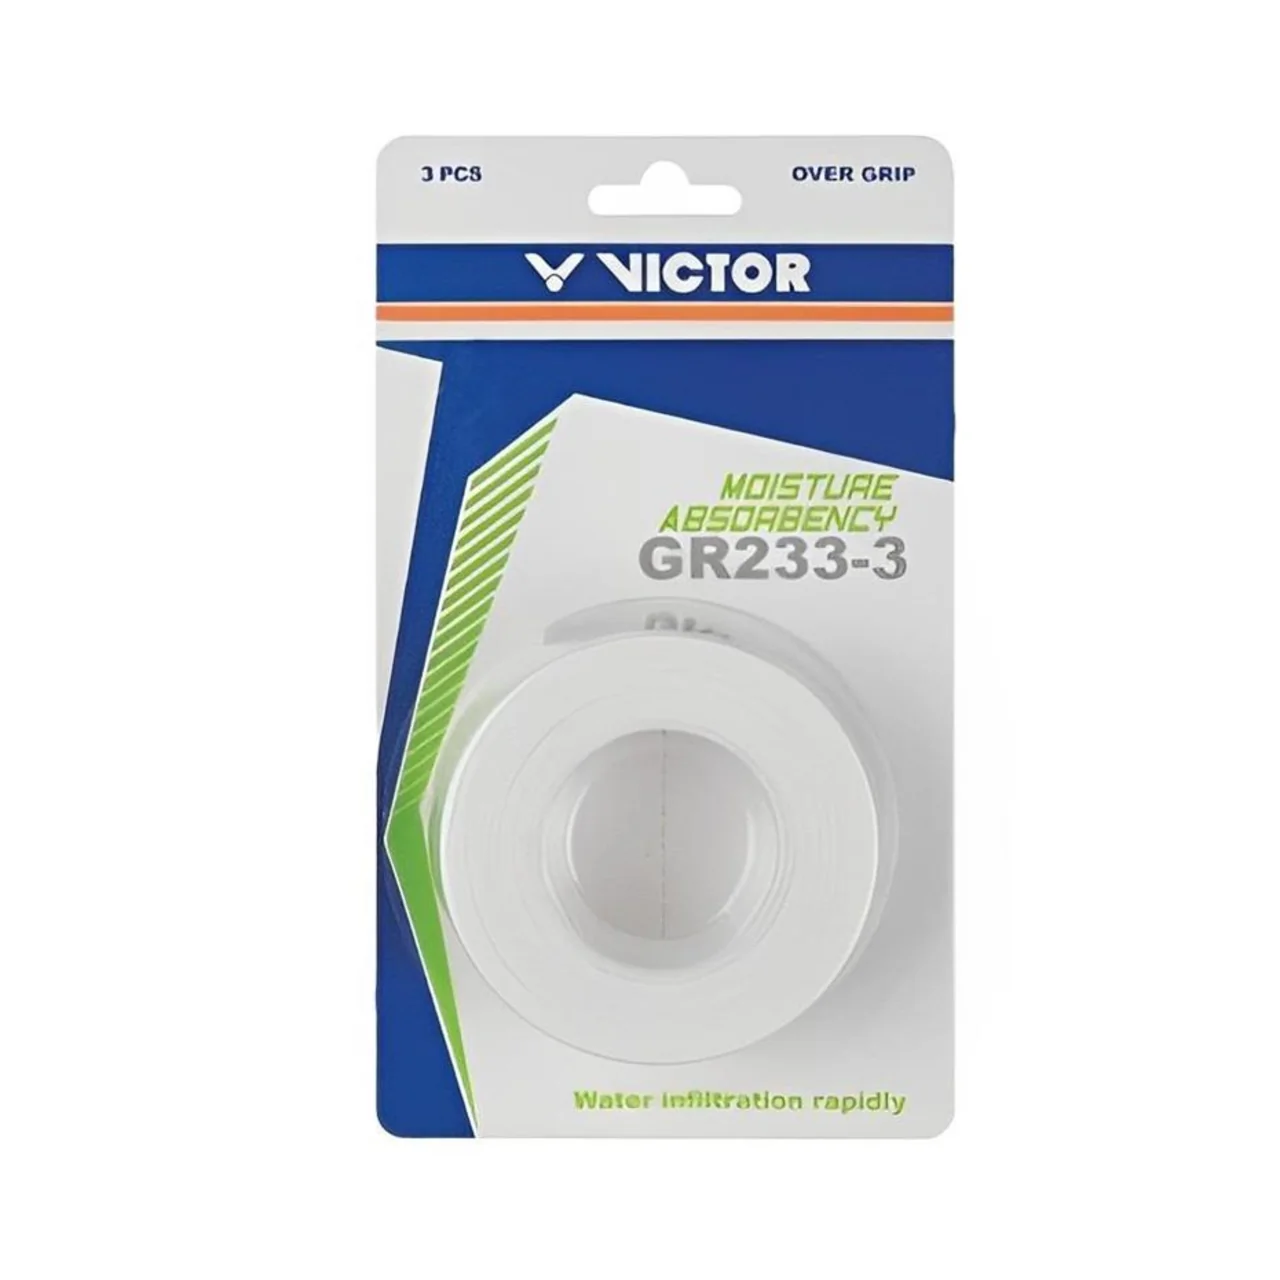 Victor Moisture Absorbency Overgrip 3-pack White